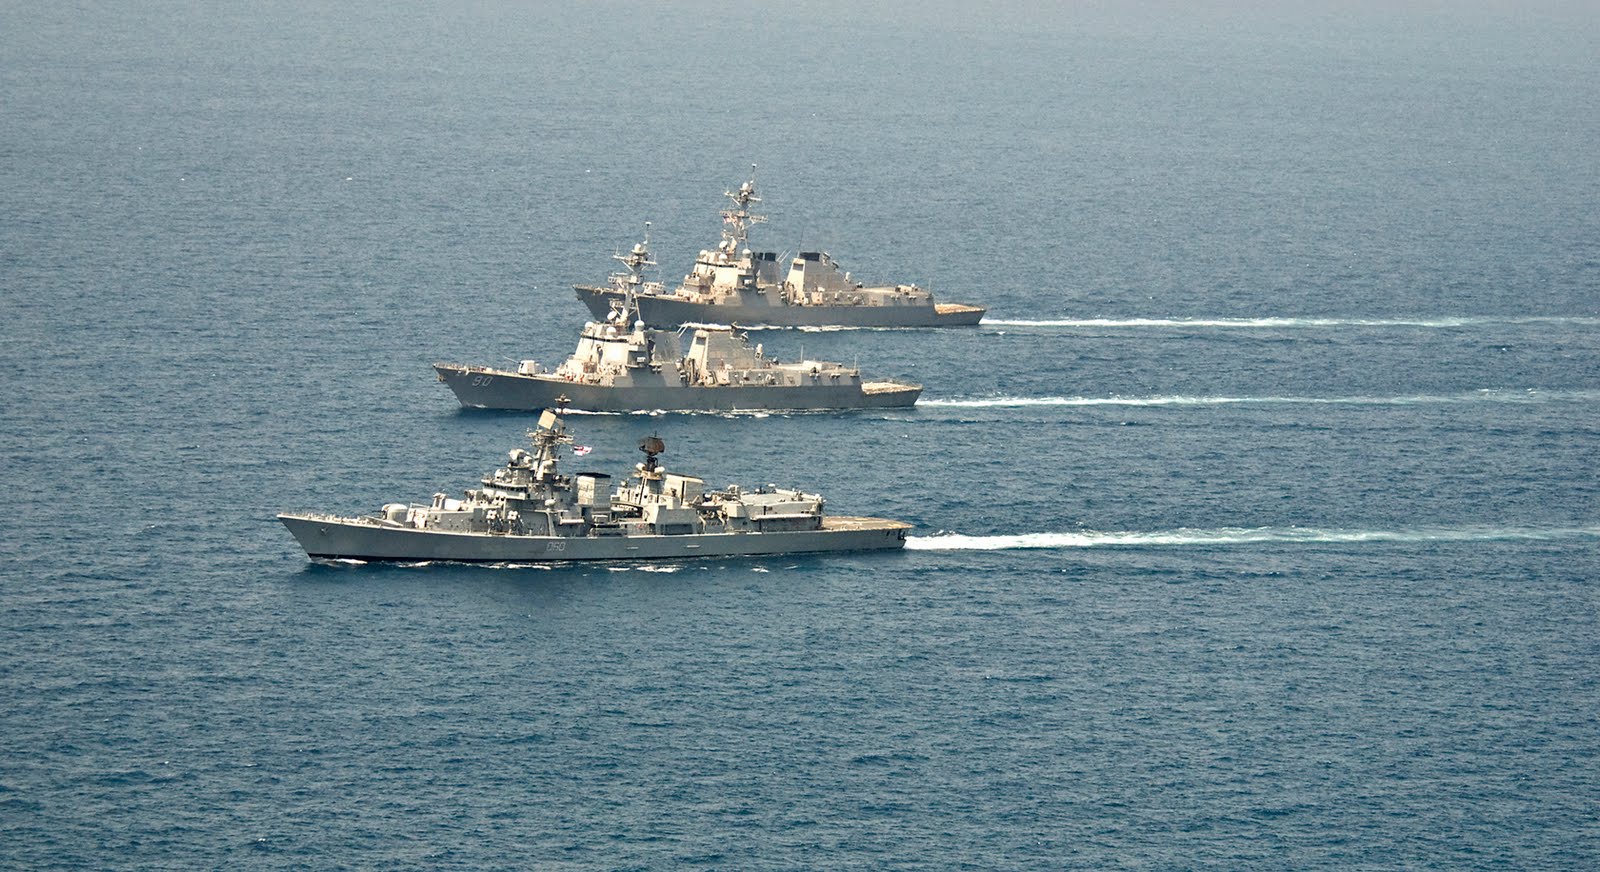 Guided Missile Destroyer INS Mysore (Delhi-class D60) with USS Chaffee (Arleigh Burke-class DDG 90) and USS Curts (Oliver Hazard Perry-class FFG 38) in Indo-US Malabar 2010 naval exercise in Indian Ocean